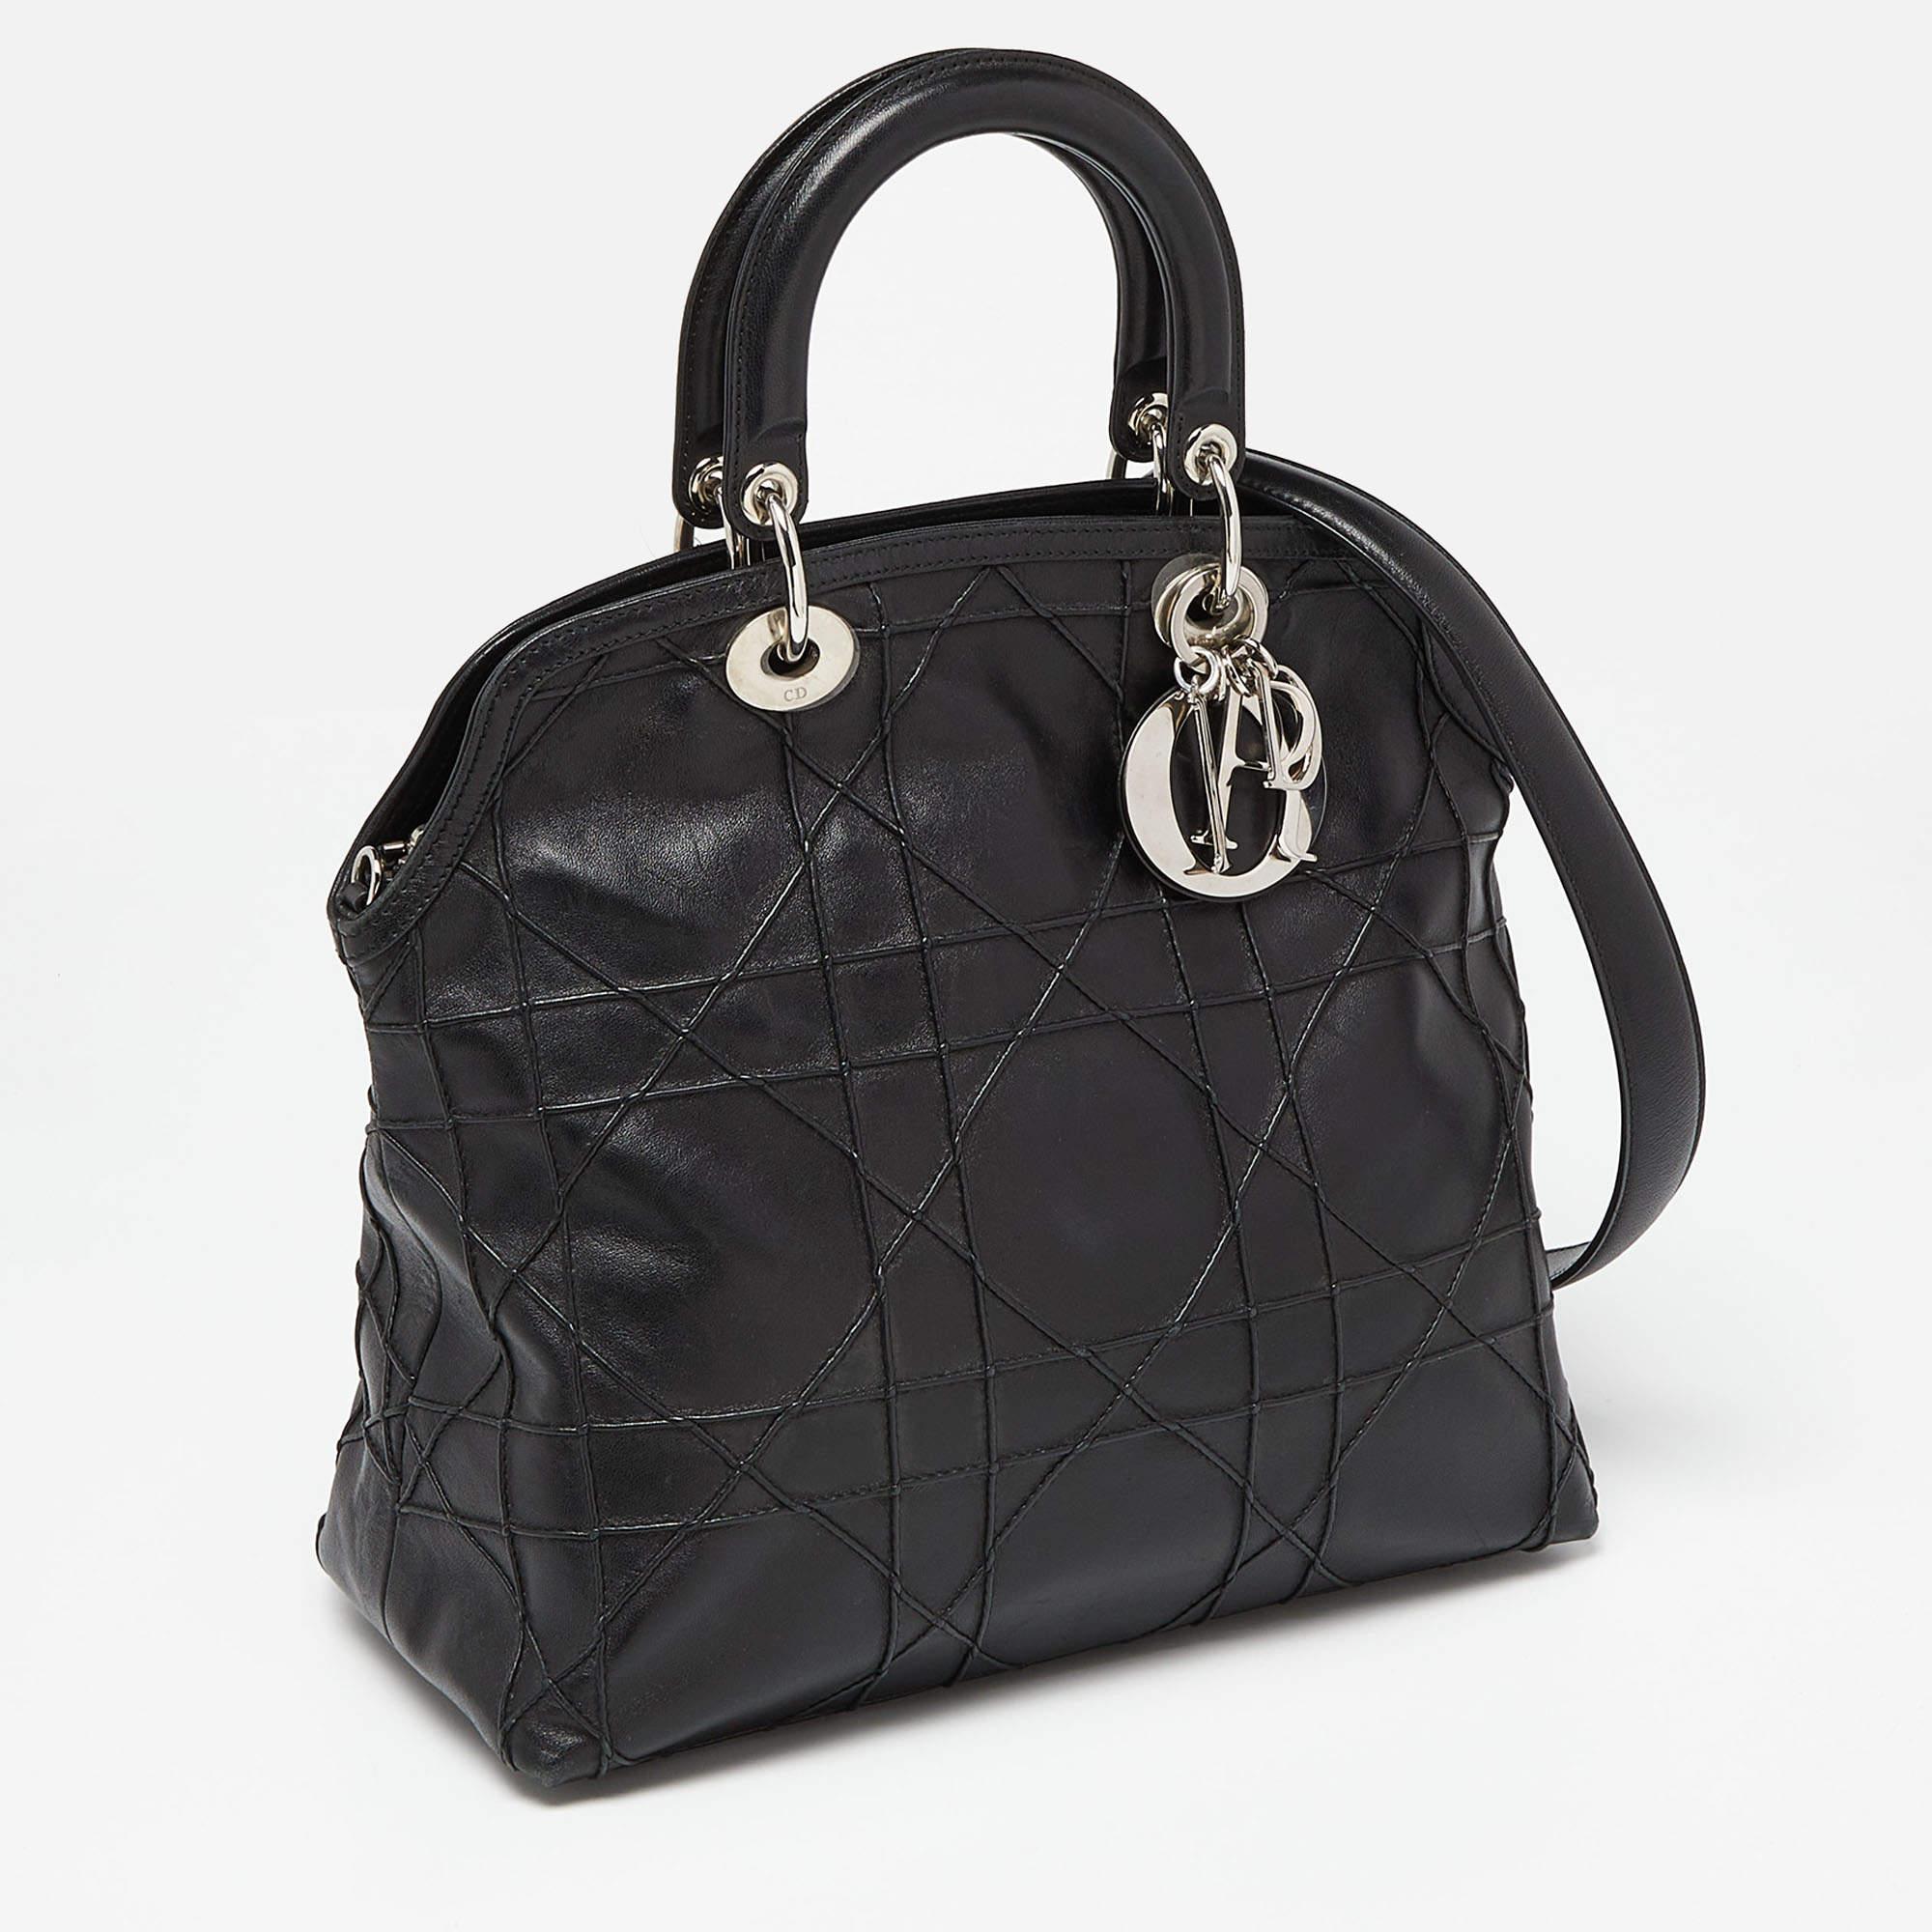 Perfect for work or travel, this Dior Granville tote is made of Cannage leather to be classy and durable. It has dual top handles, a shoulder strap, and a spacious lined interior.

